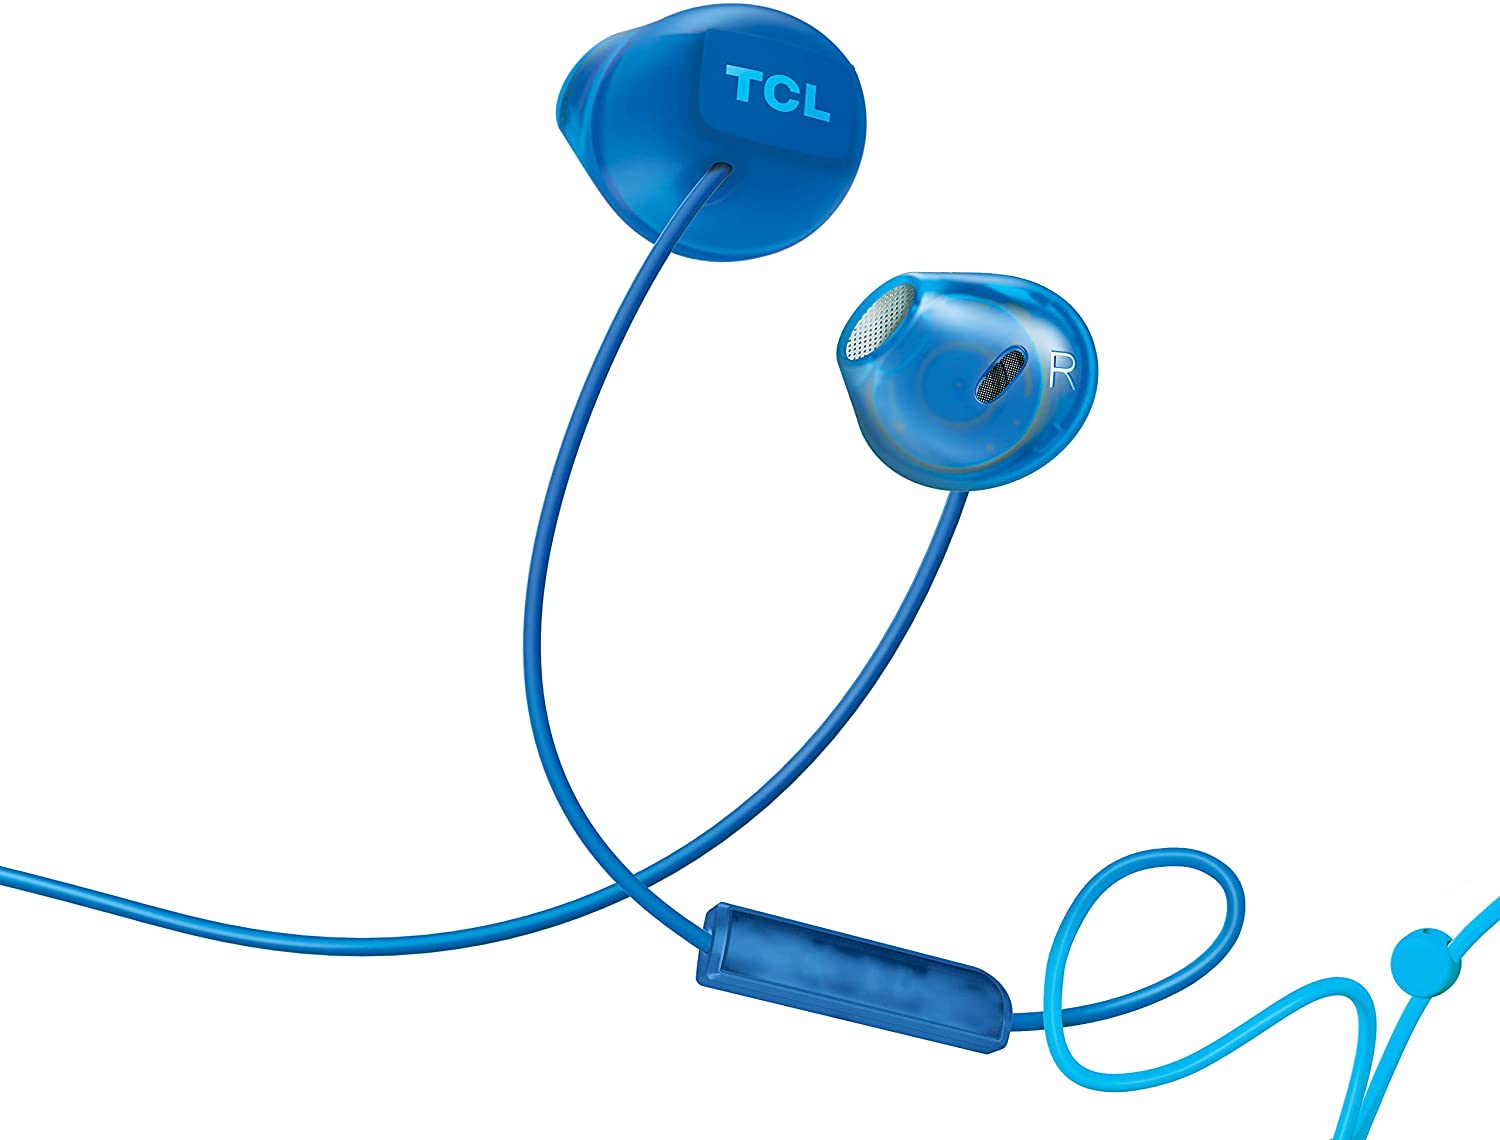 ''TCL Socl200 in-Ear Earbuds Wired HEADPHONES with 12.2mm Speaker Drivers for Rich Bass and Clear Sou